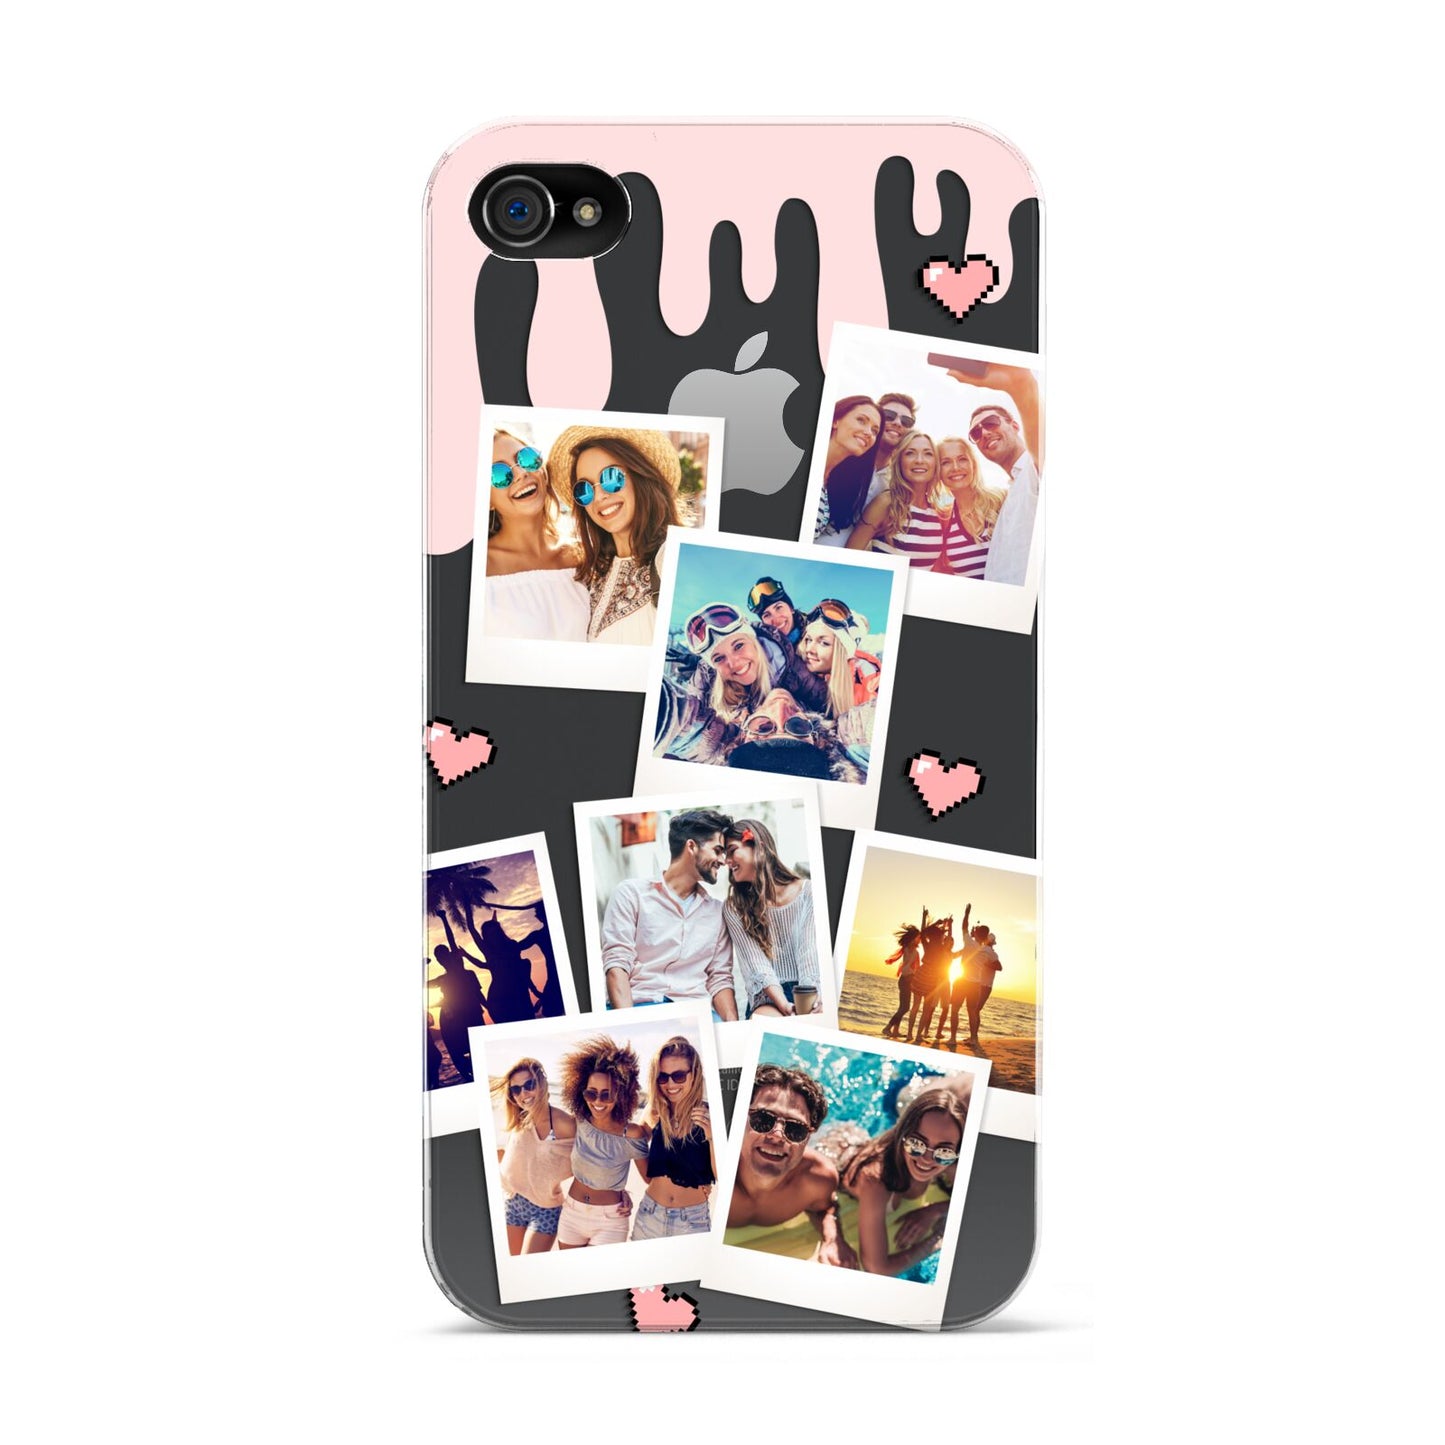 Digital Hearts Photo Upload with Text Apple iPhone 4s Case